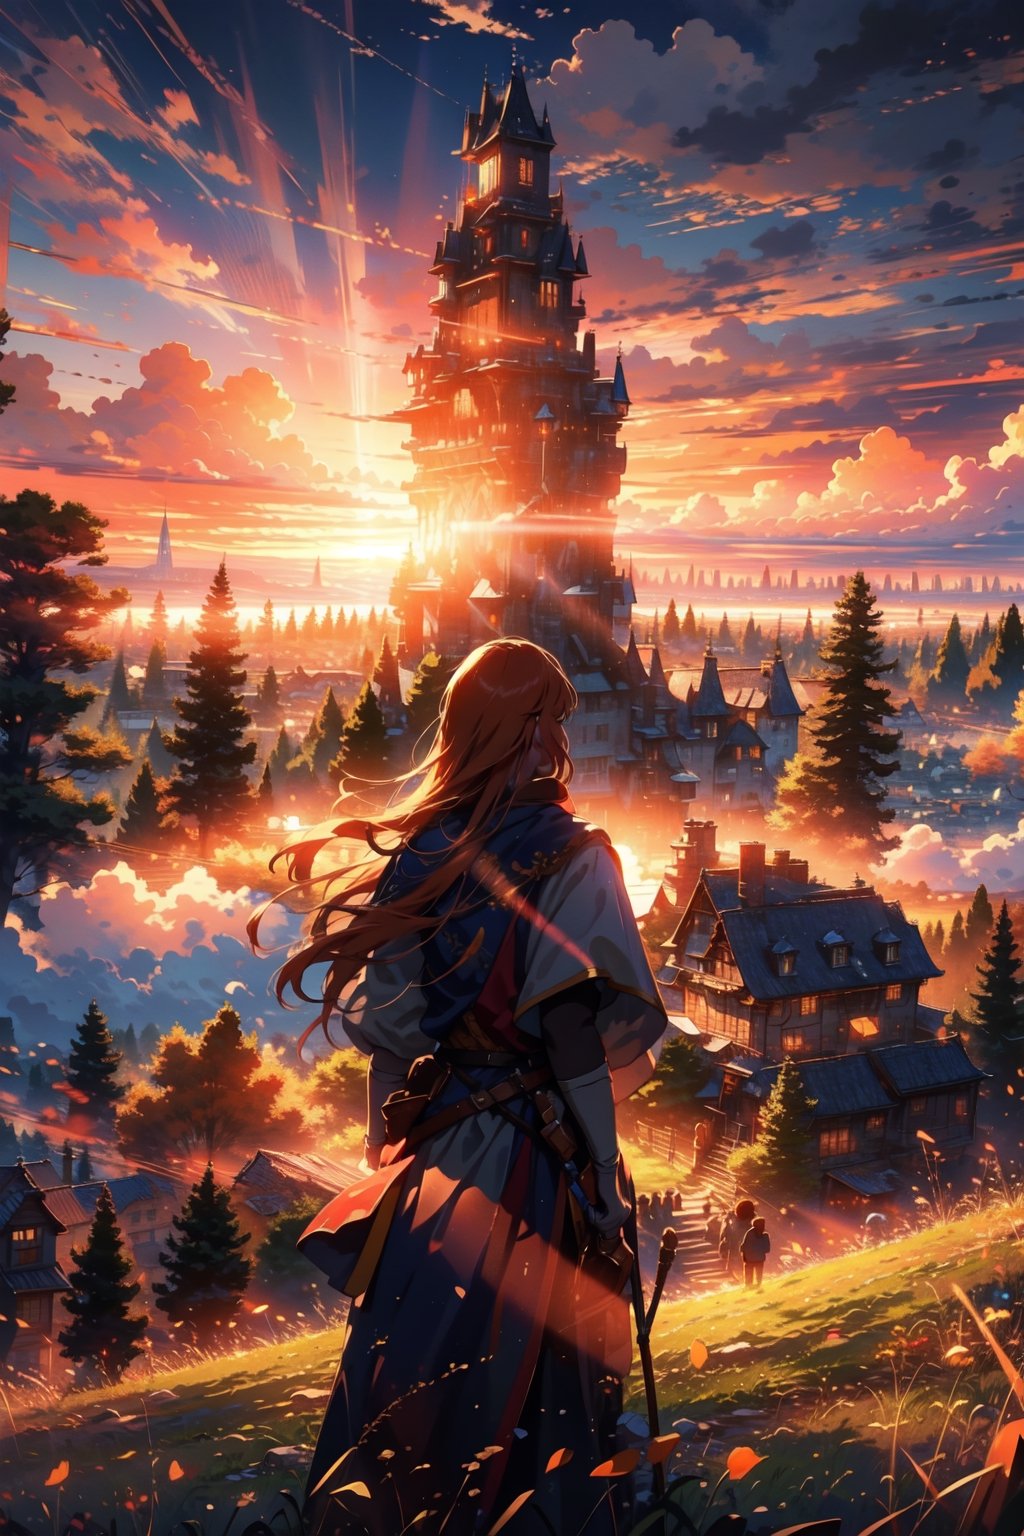 1girl, 1boy, beautiful landscape, sunset, plain, girl and boy watching at sunset, beautiful clouds, beautiful sky, detailed image, beautiful trees, stunning image, perfect use of light, ballad lighting, wind, castle in the distance, medieval aesthetics 